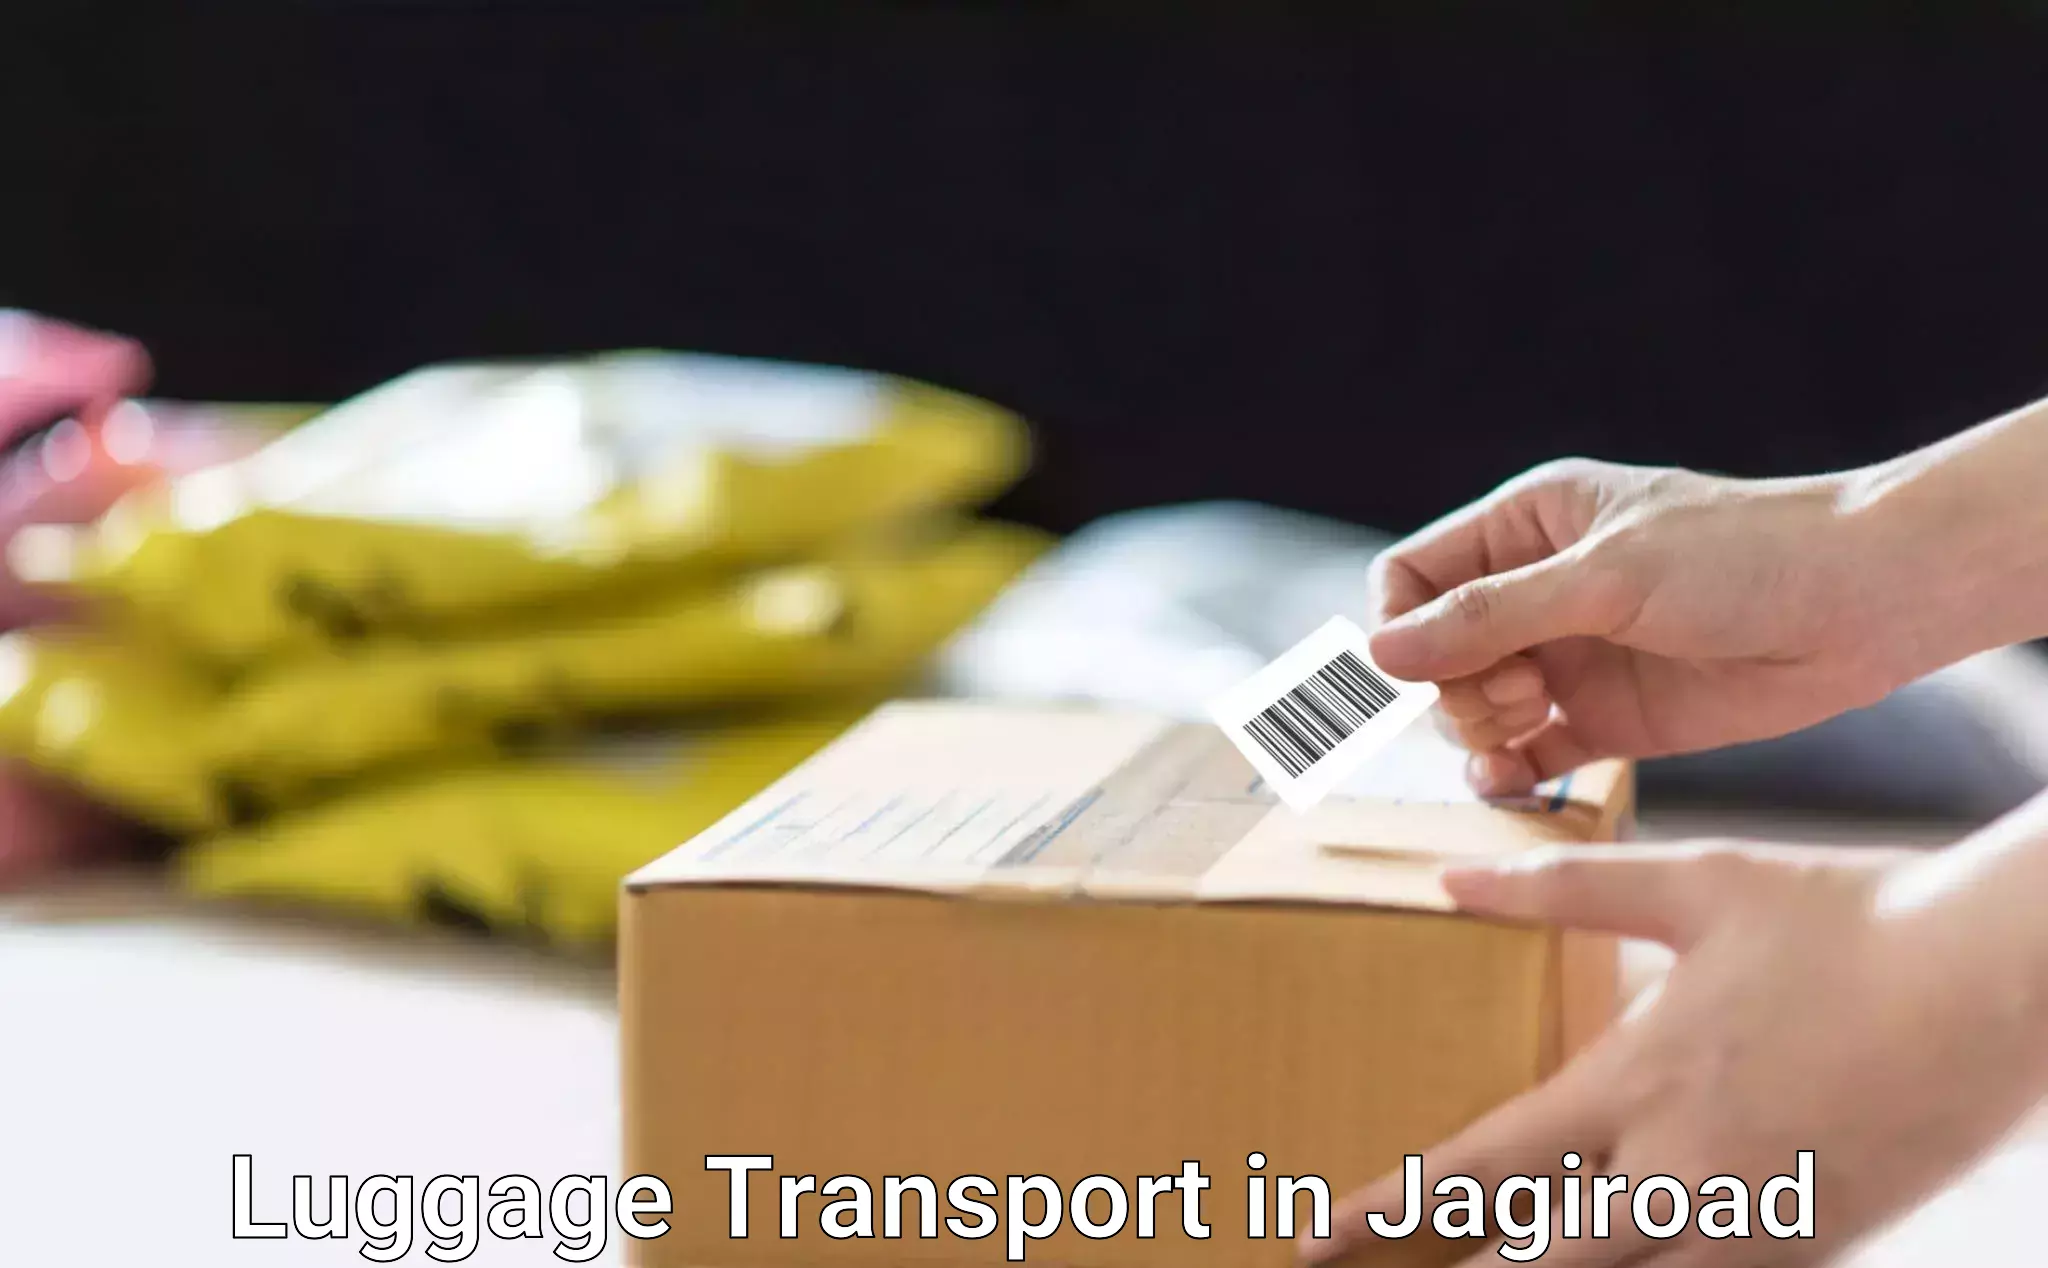 Business luggage transport in Jagiroad